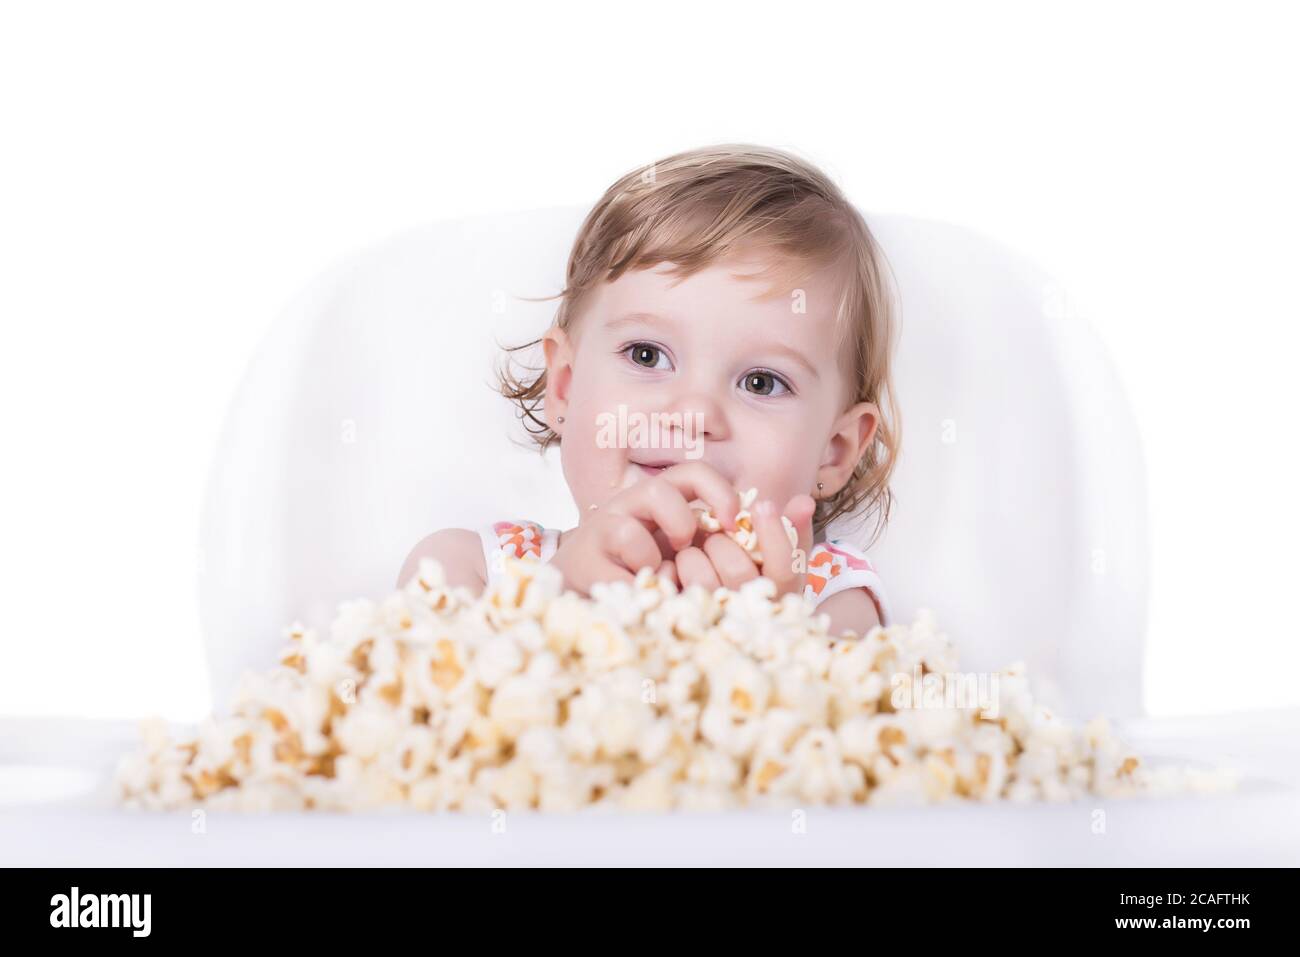 Selective focus shot of a happy little girl eating popcorn Stock Photo